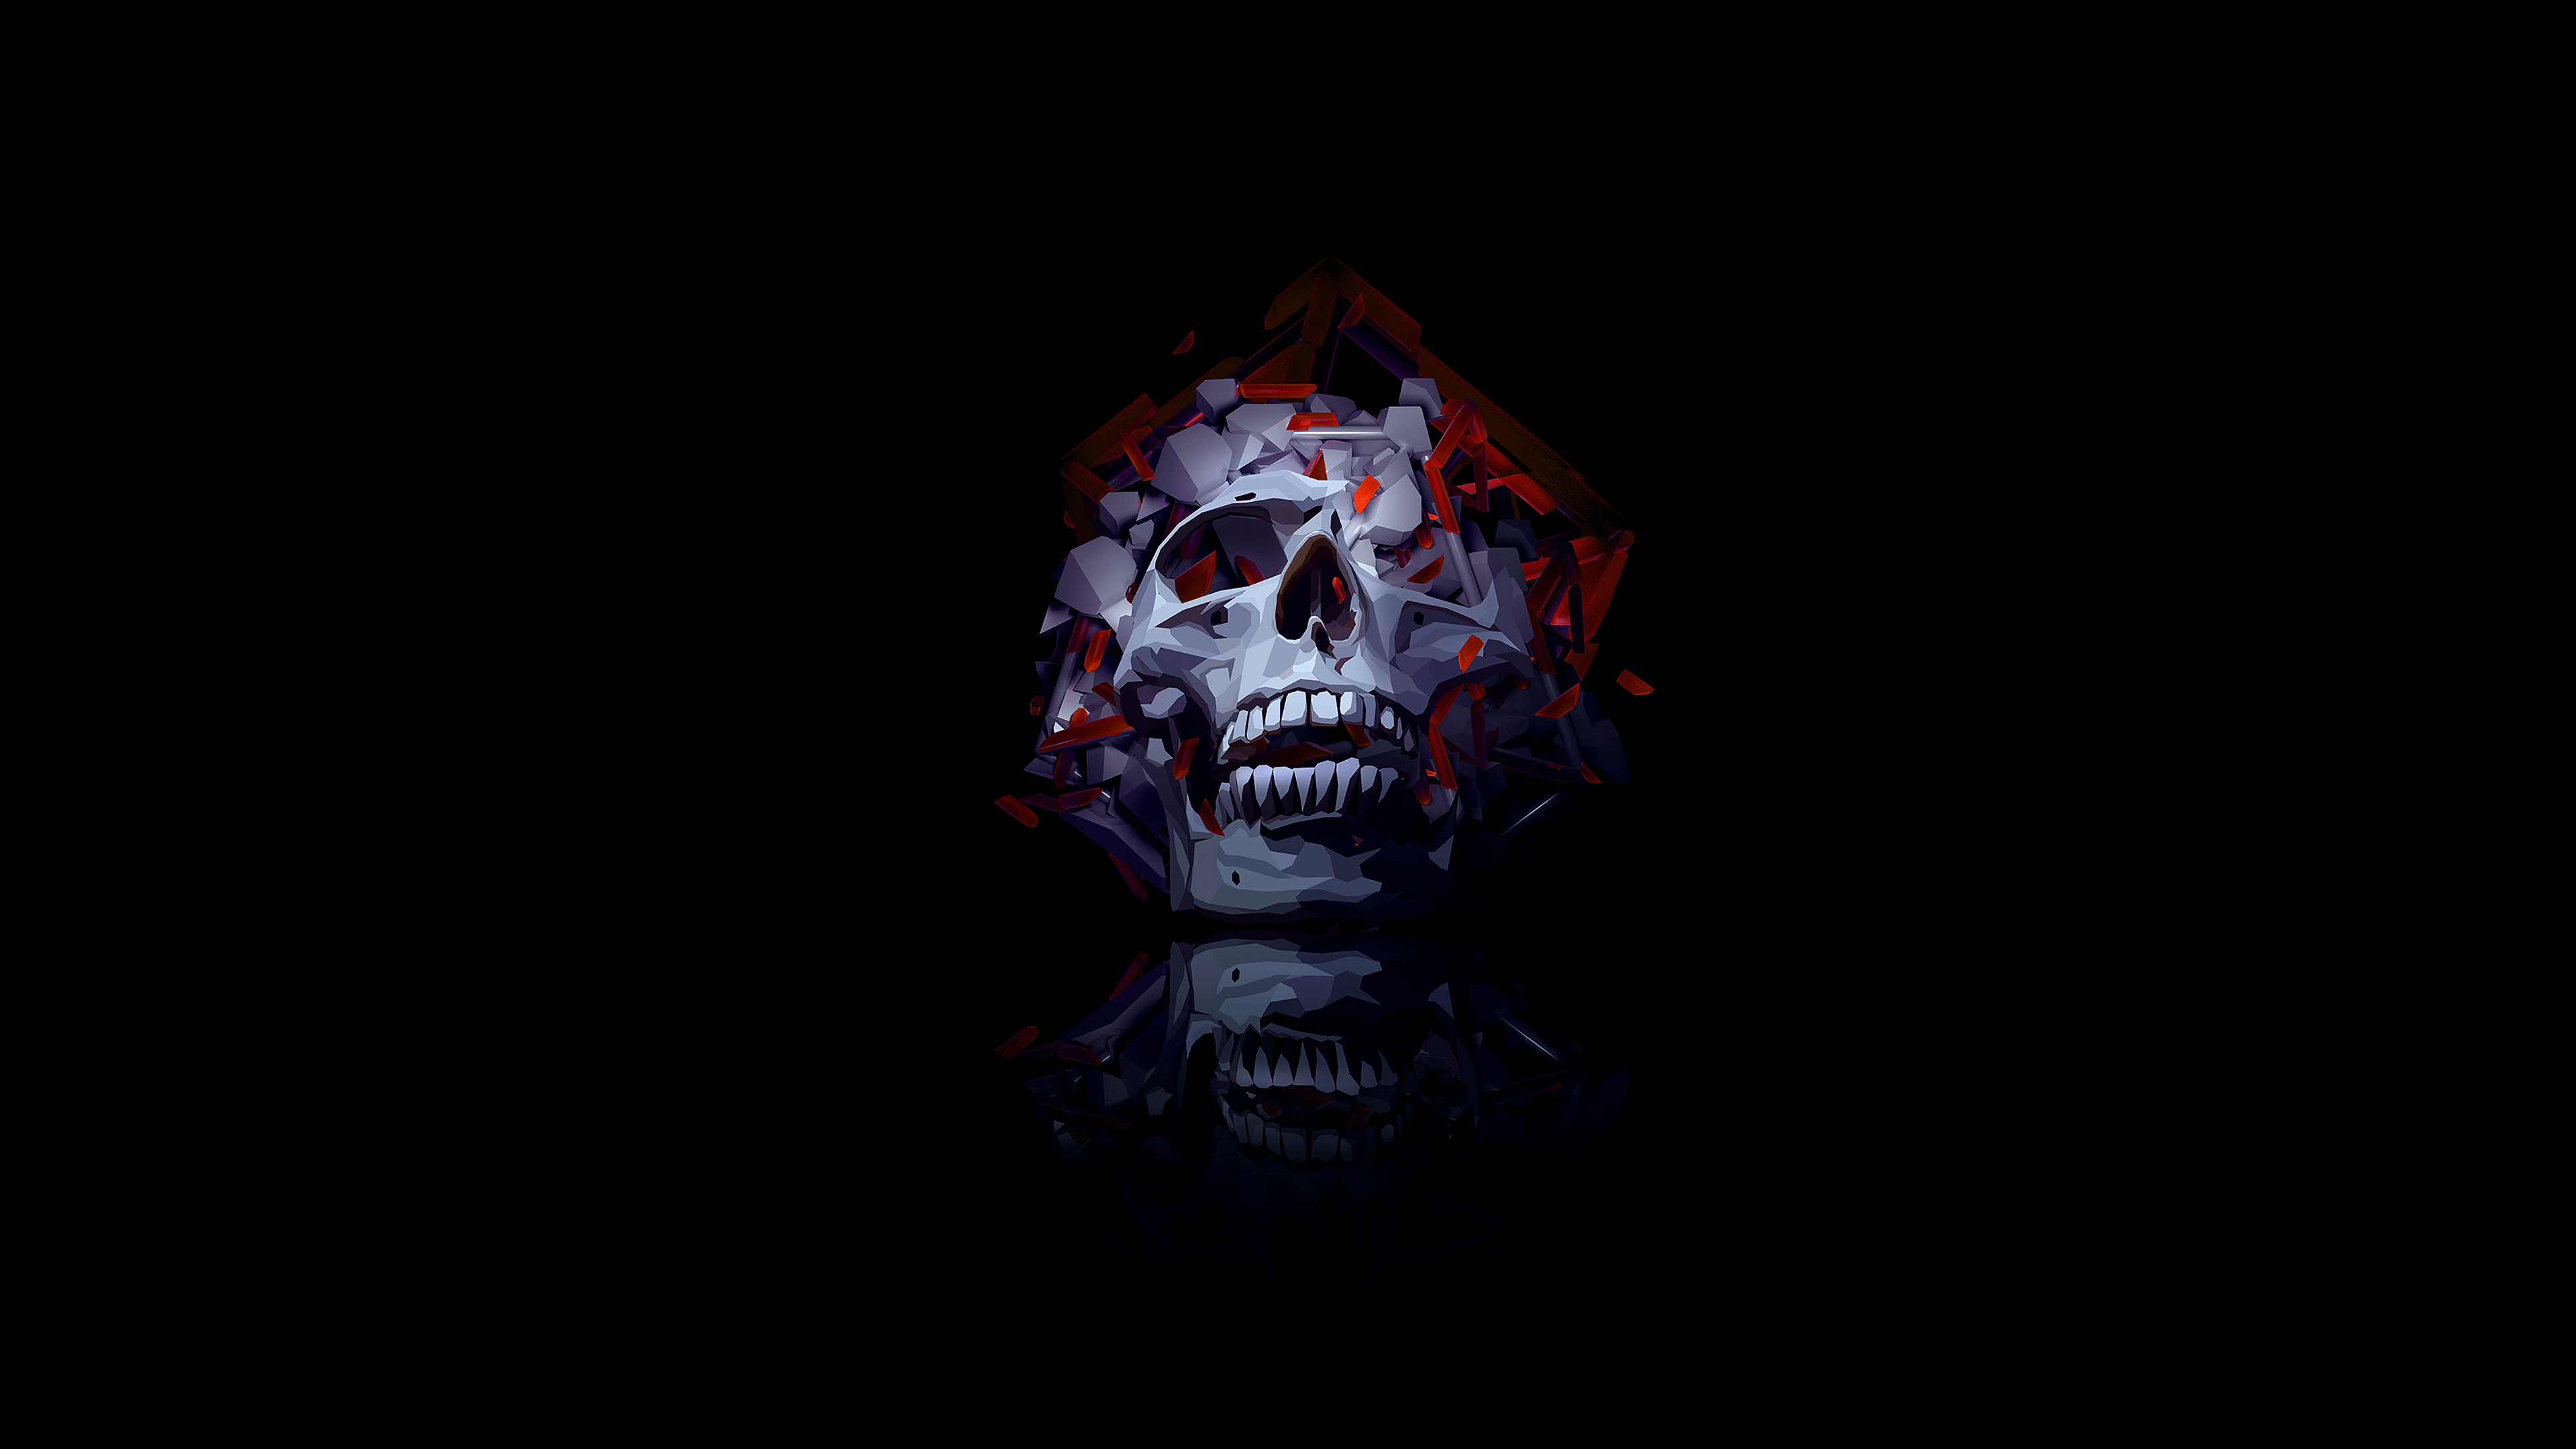 Low poly skull on a black background - Low poly